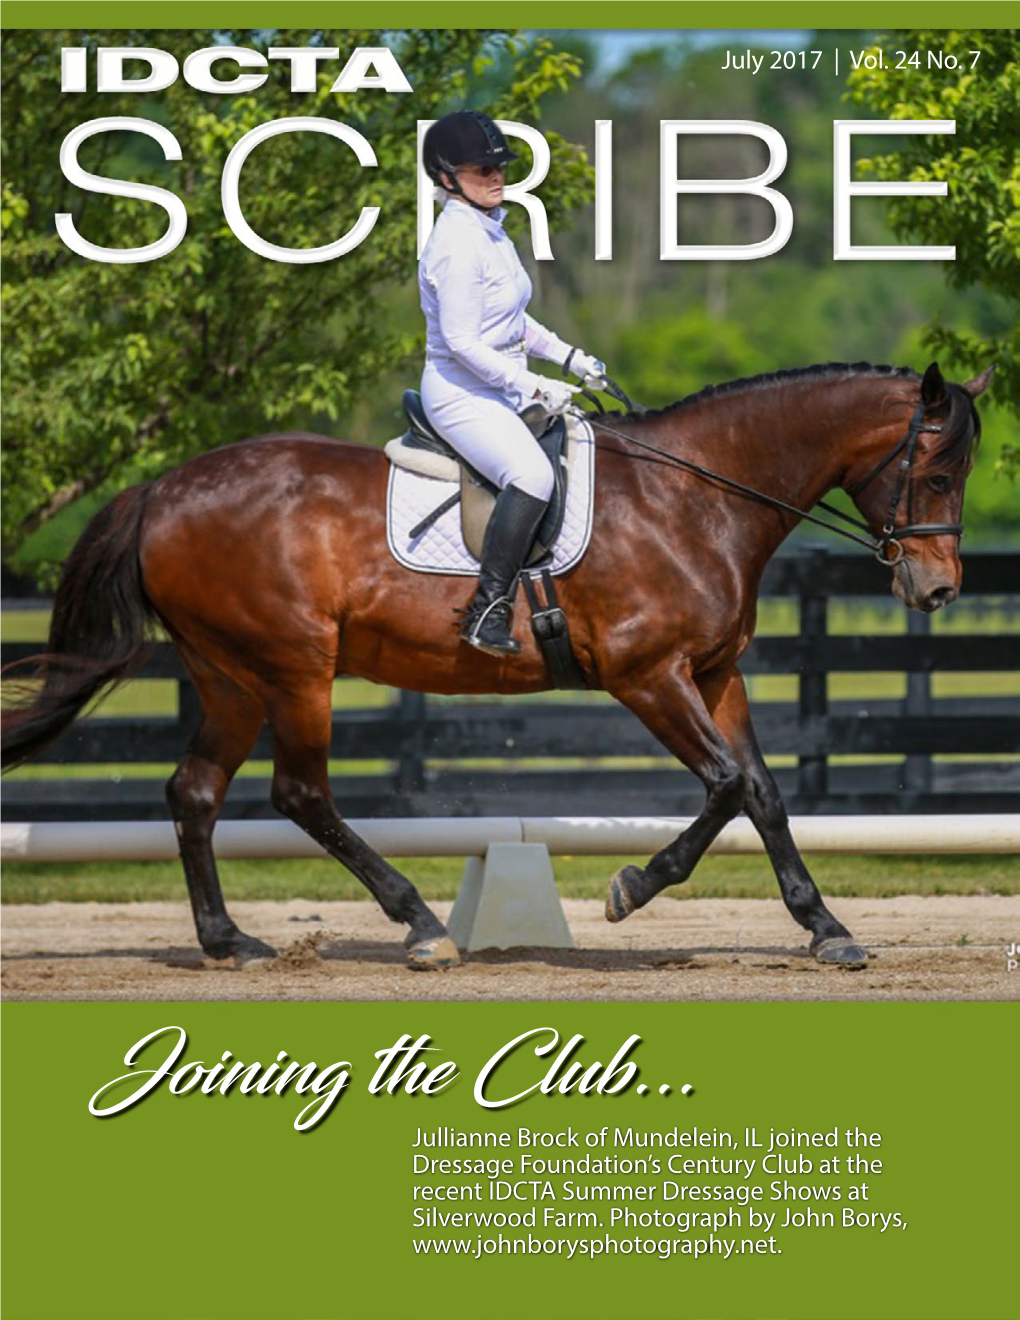 Joining the Club... Jullianne Brock of Mundelein, IL Joined the Dressage Foundation’S Century Club at the Recent IDCTA Summer Dressage Shows at Silverwood Farm